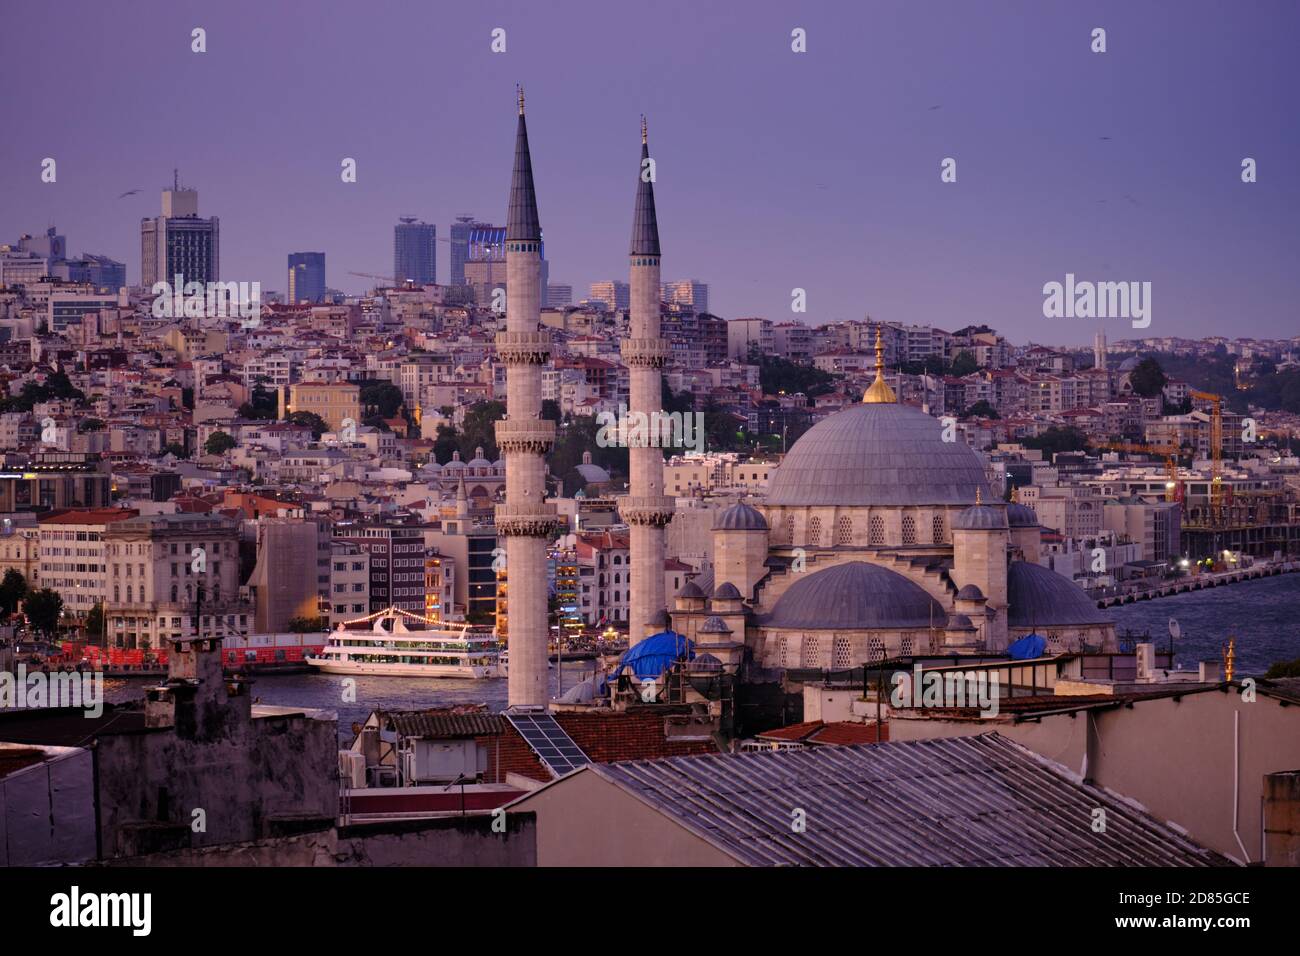 The New Mosque in Istanbul, Turkey Stock Photo